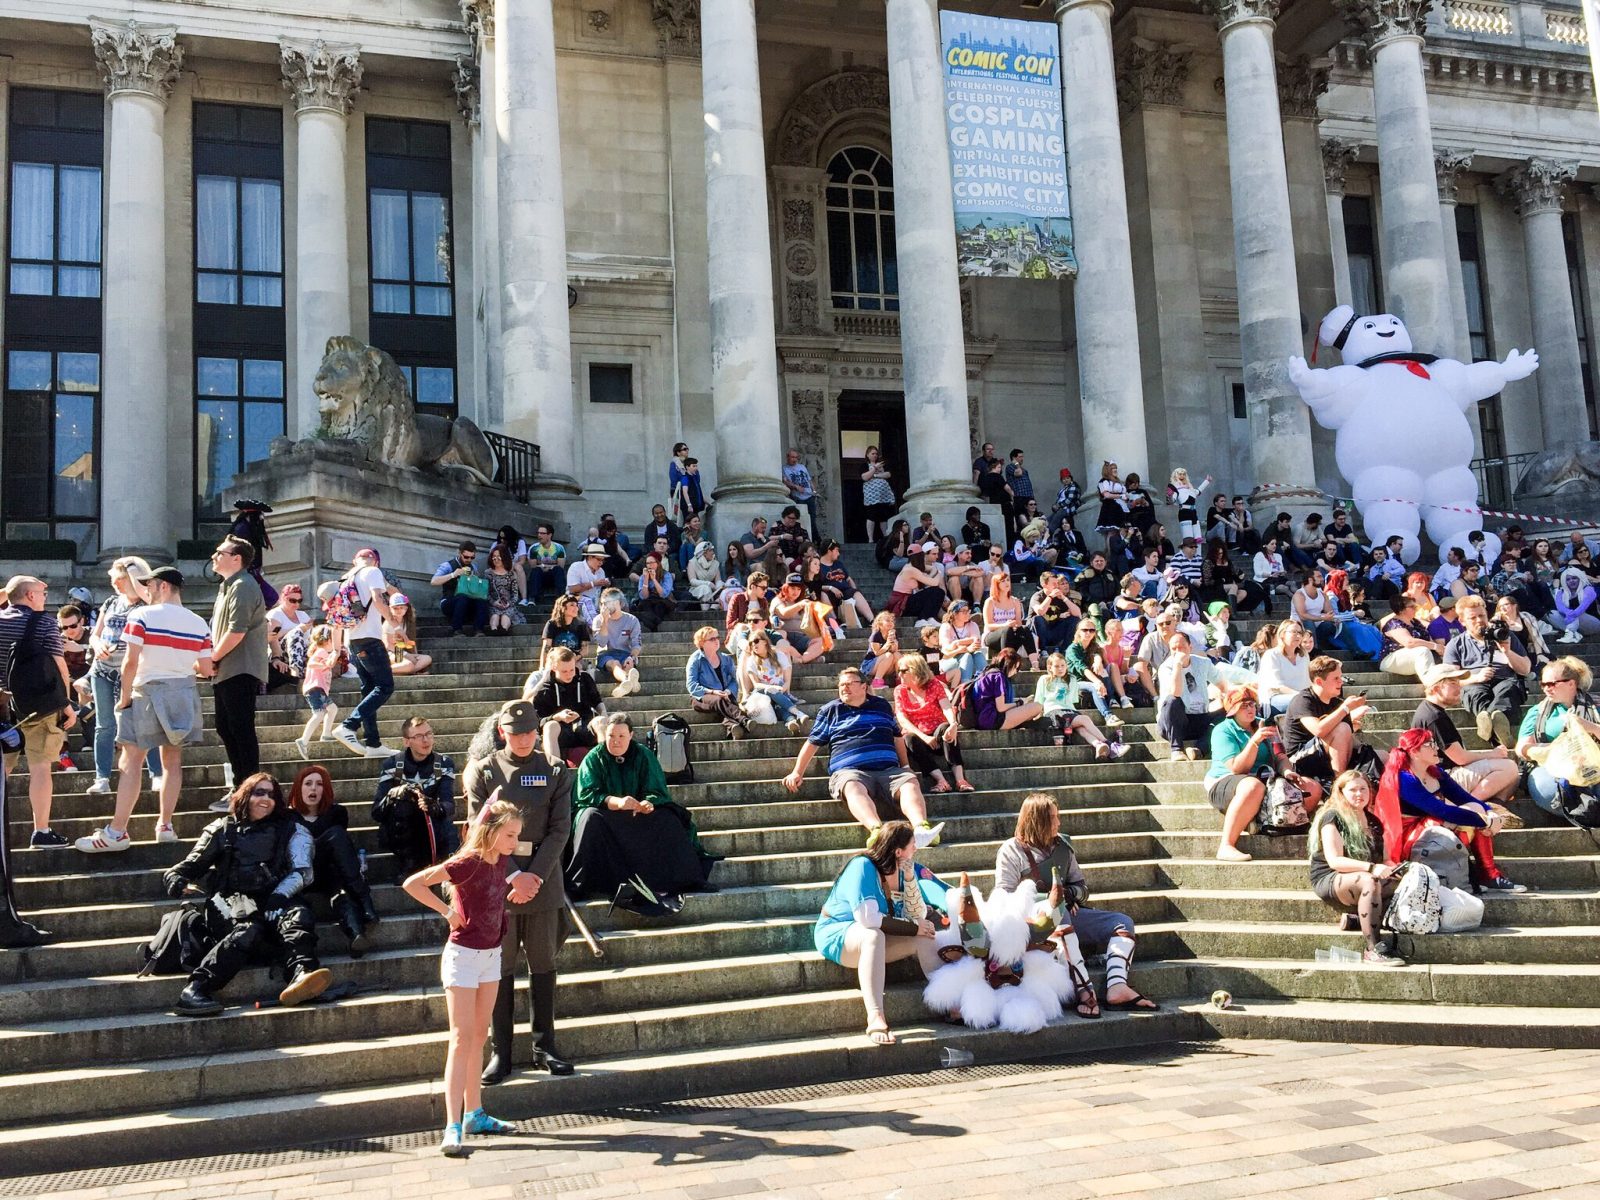 Enjoying the sun: Portsmouth Comic Con attendees on the steps of the Guildhall